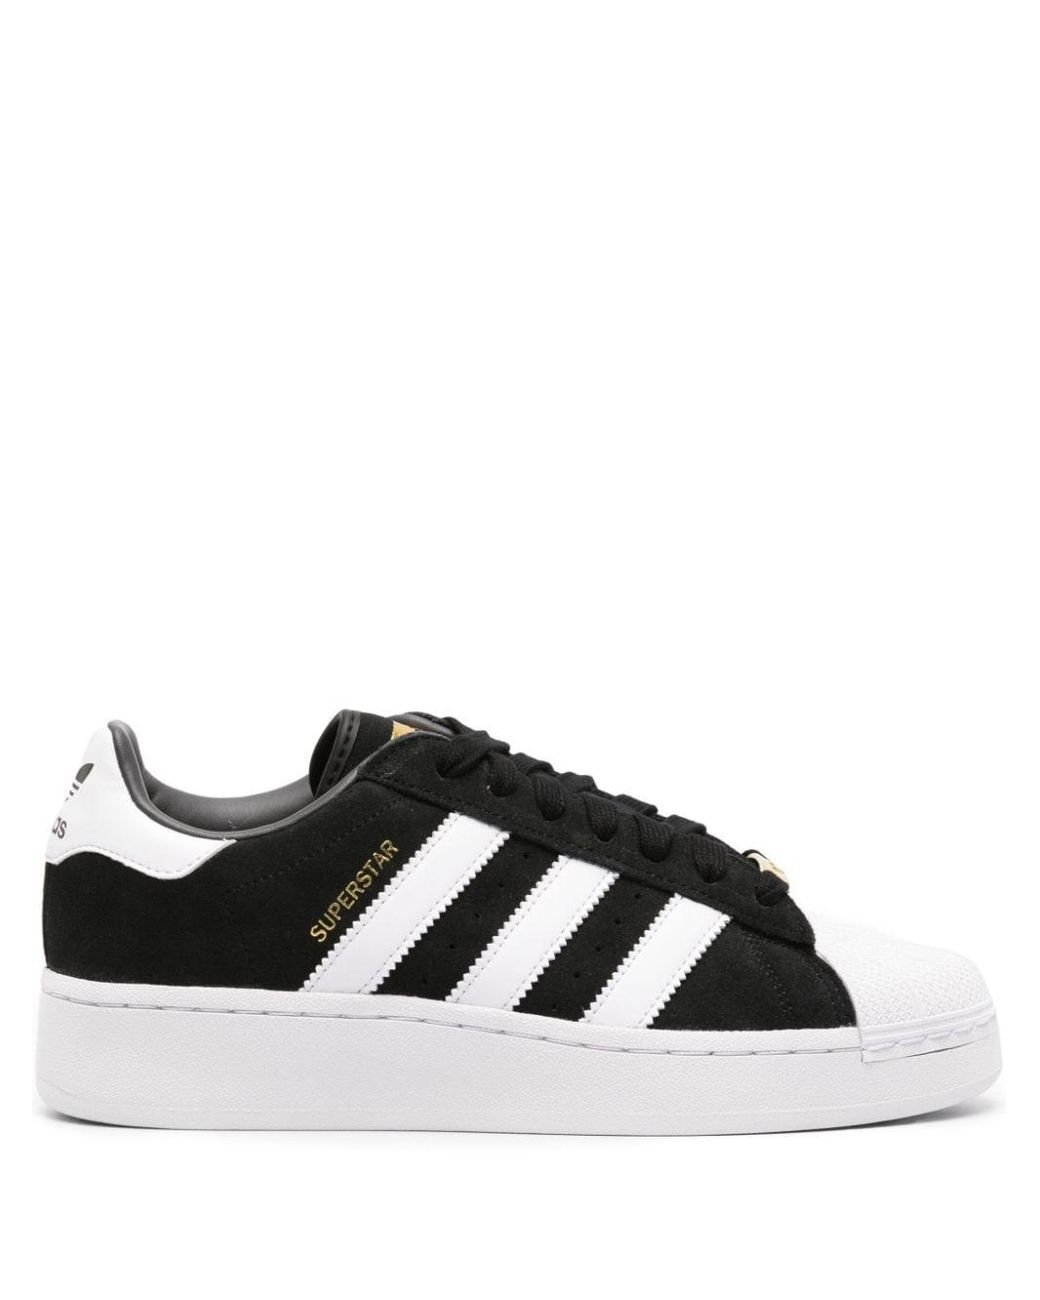 adidas Superstar Xlg Suede Leather Sneakers in Black | Lyst